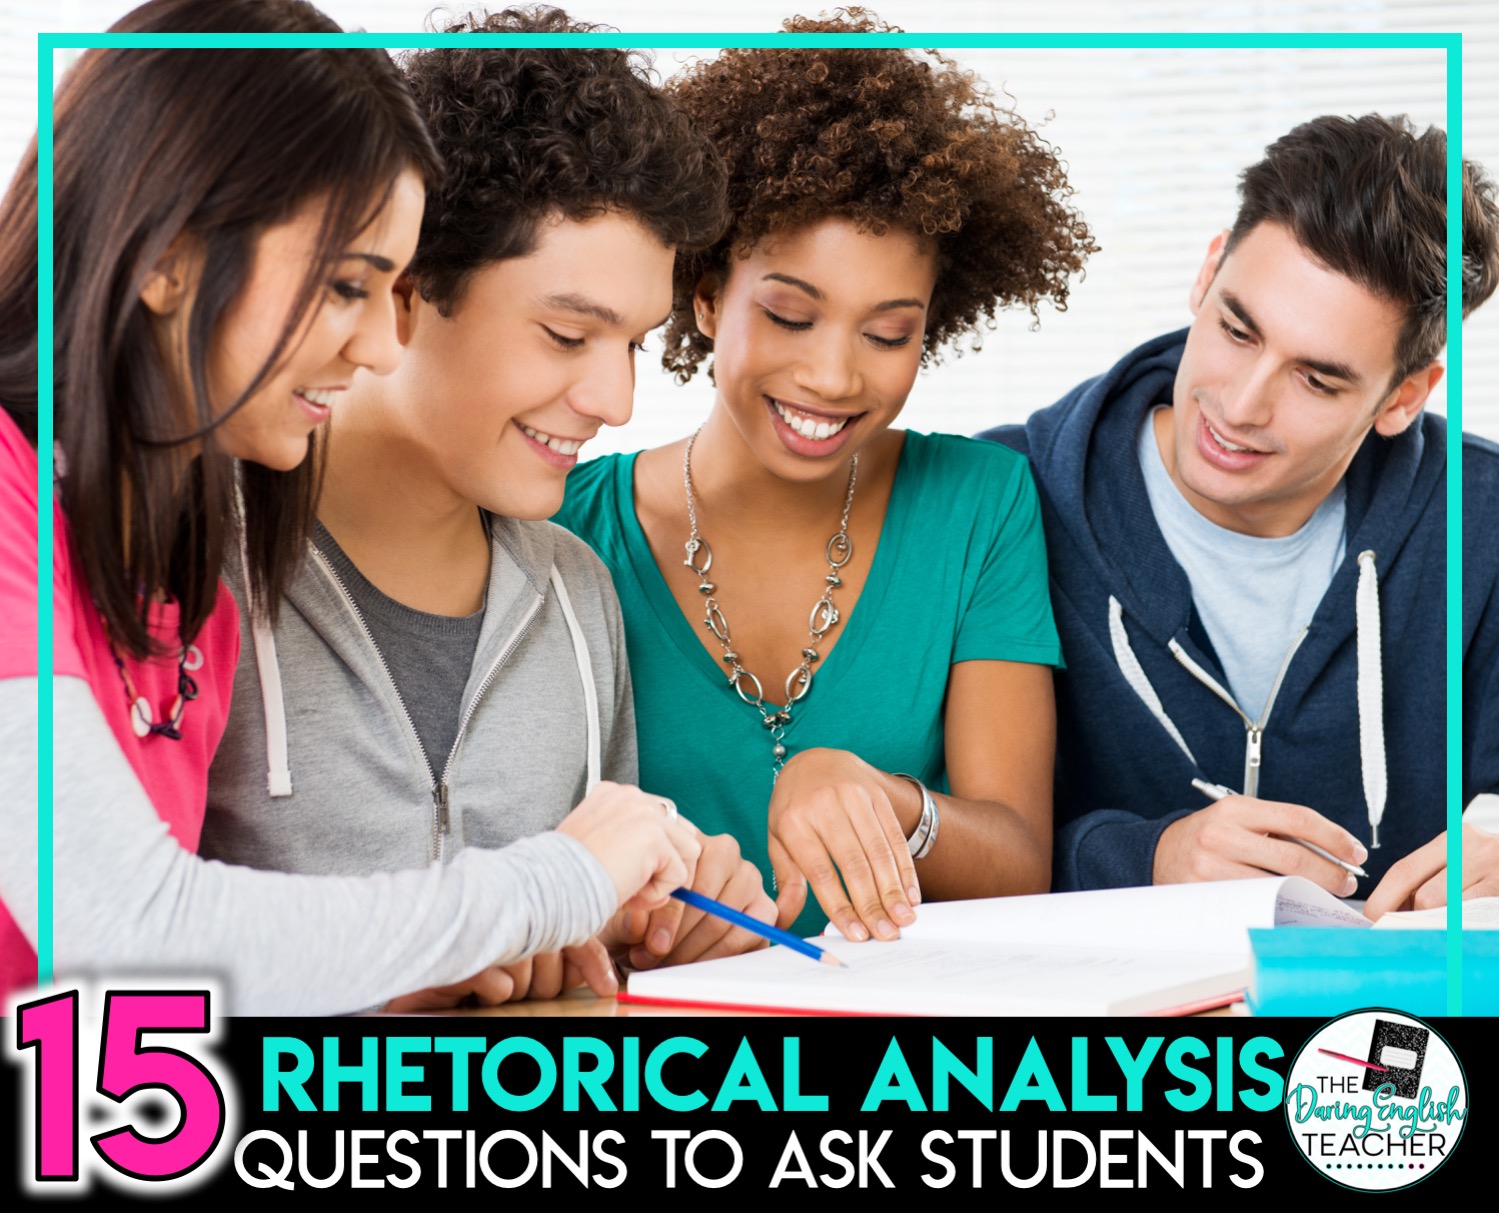 15 Rhetorical Analysis Questions to Ask Your Students